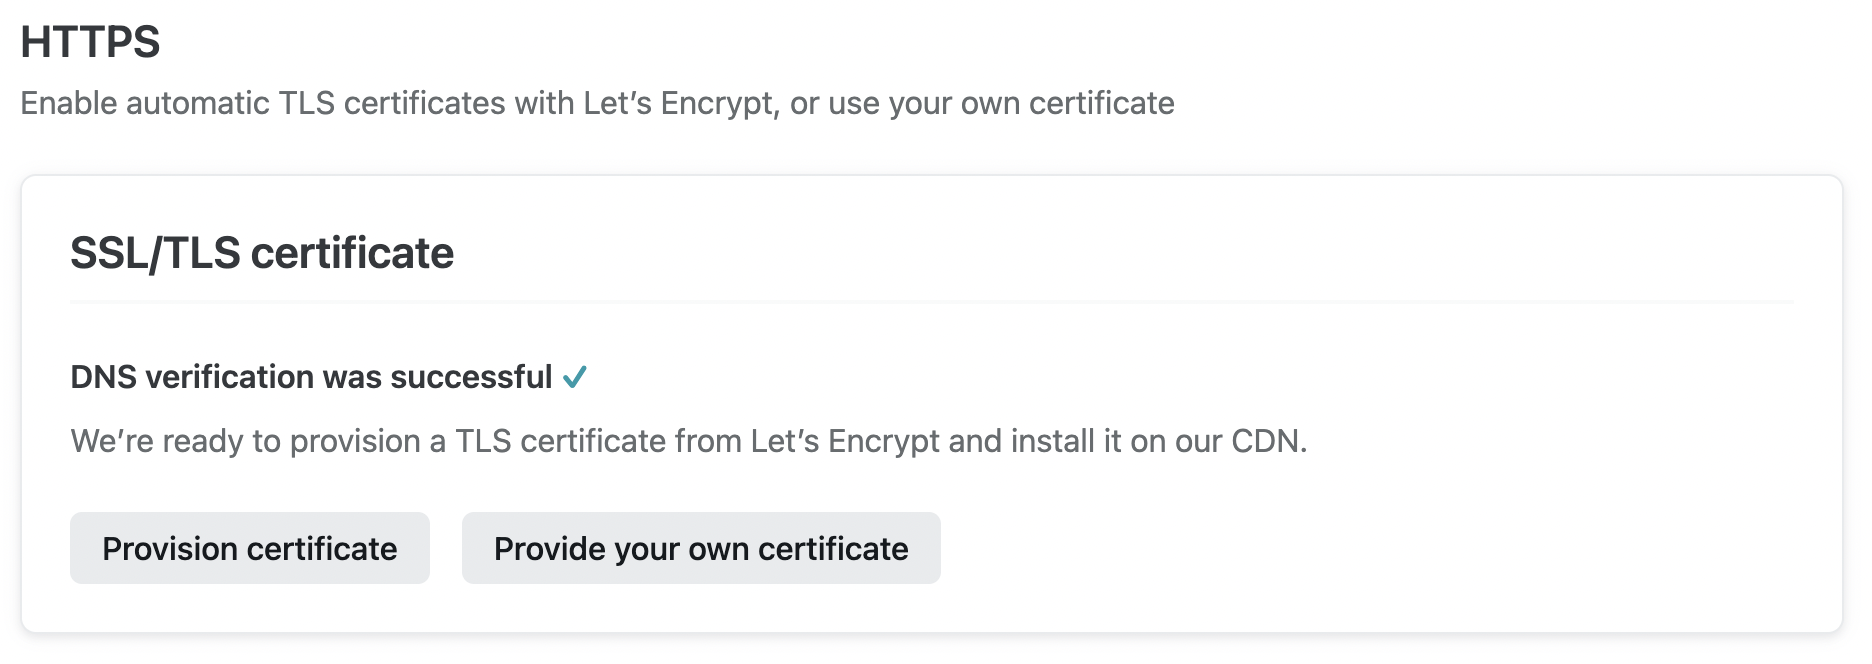 Creating the TLS certificate in Netlify